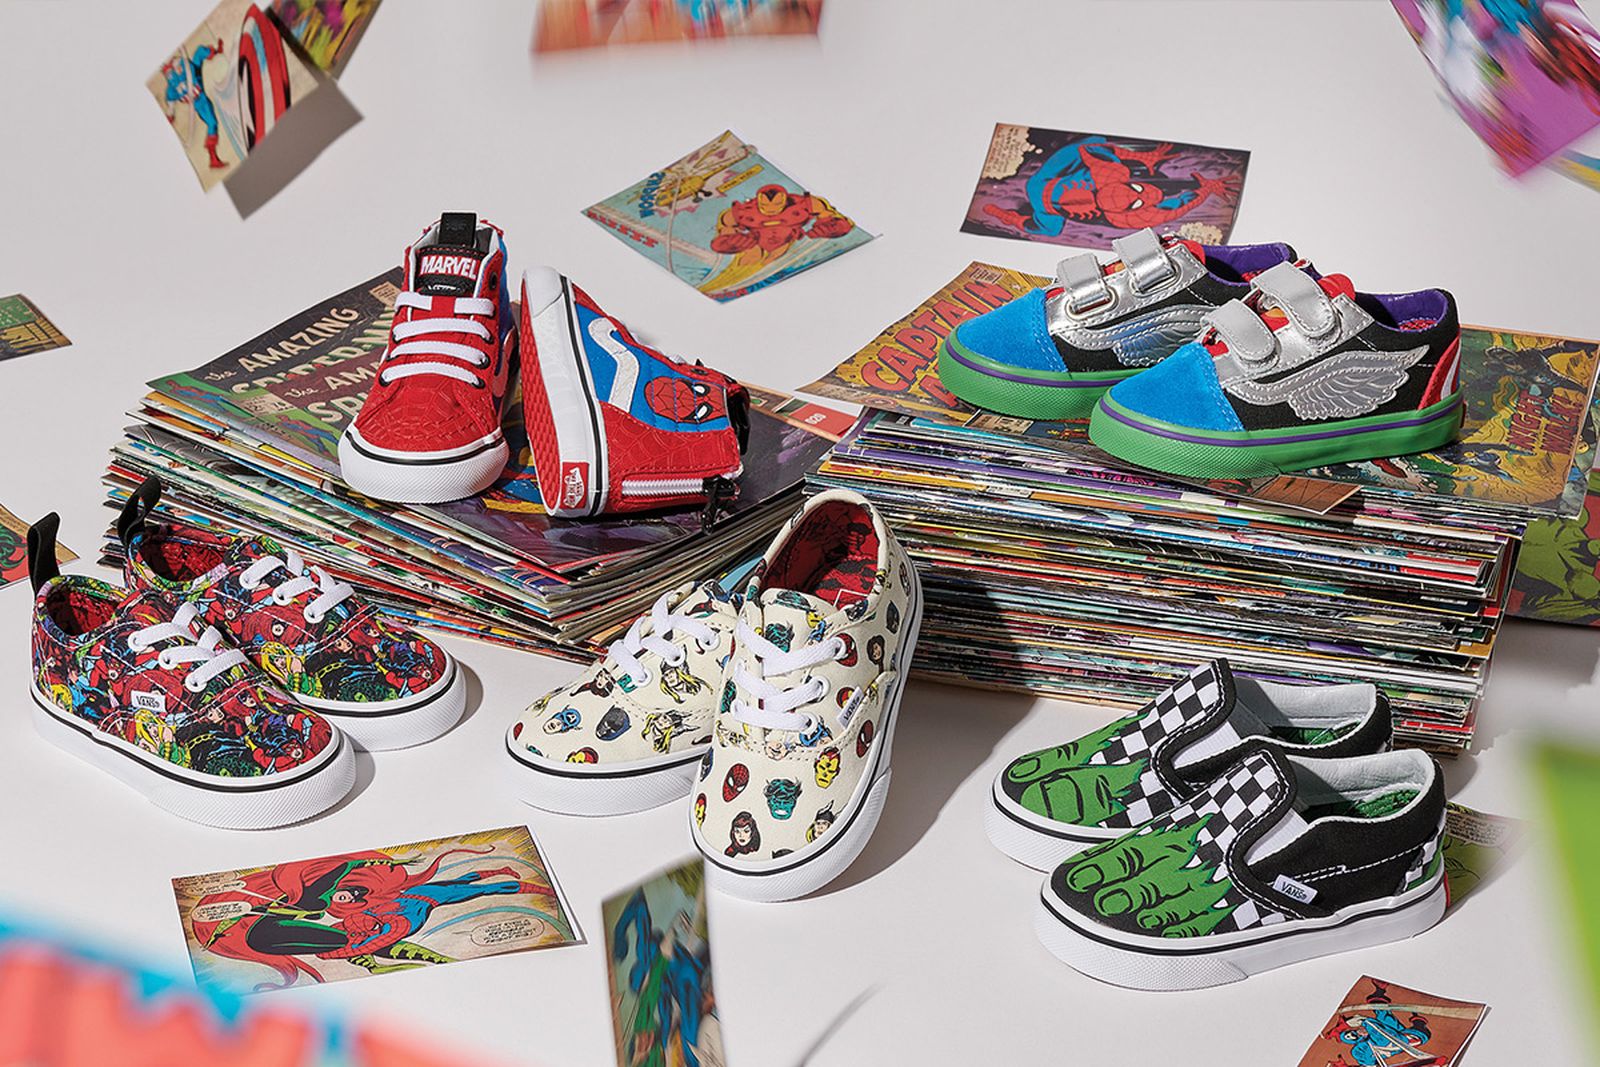 bra Stick out unit Vans x Marvel Sneaker Pack: Release Date, Price & More Info